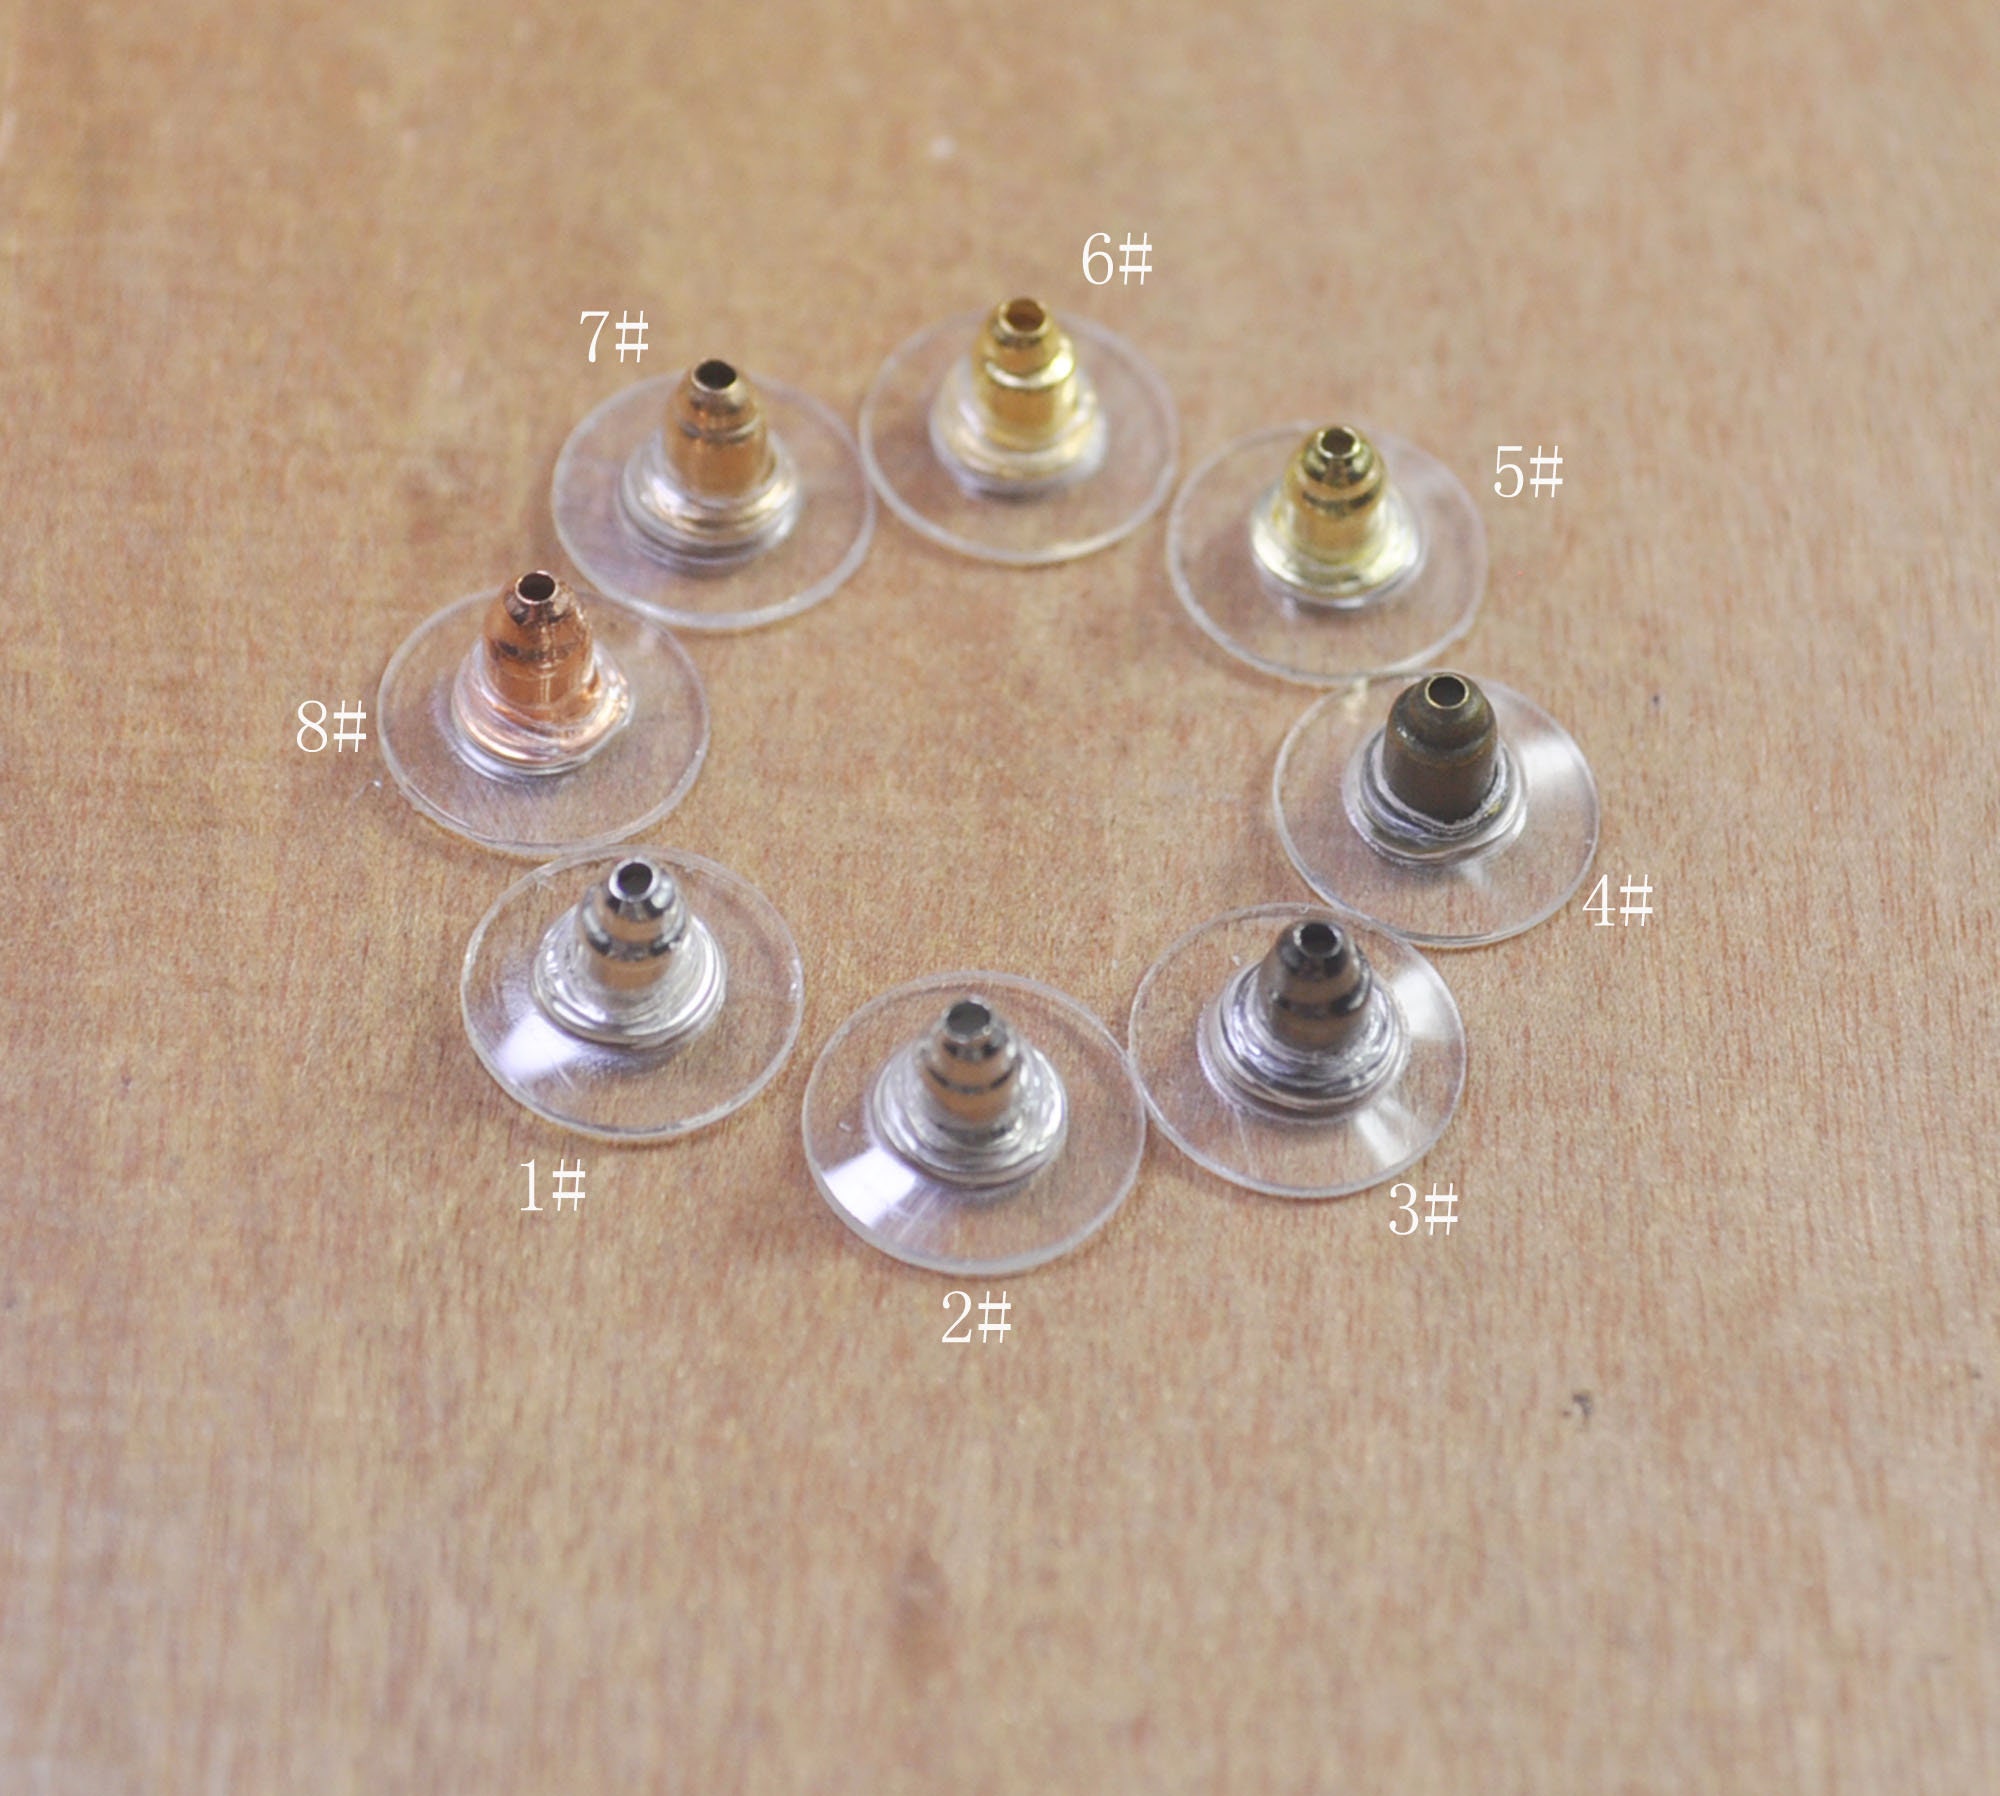 200 Pieces Bullet Clutch Earring Backs for Studs with Pad Rubber Earring Stoppers Pierced Safety Backs (Rose Gold, Gold, Silver)